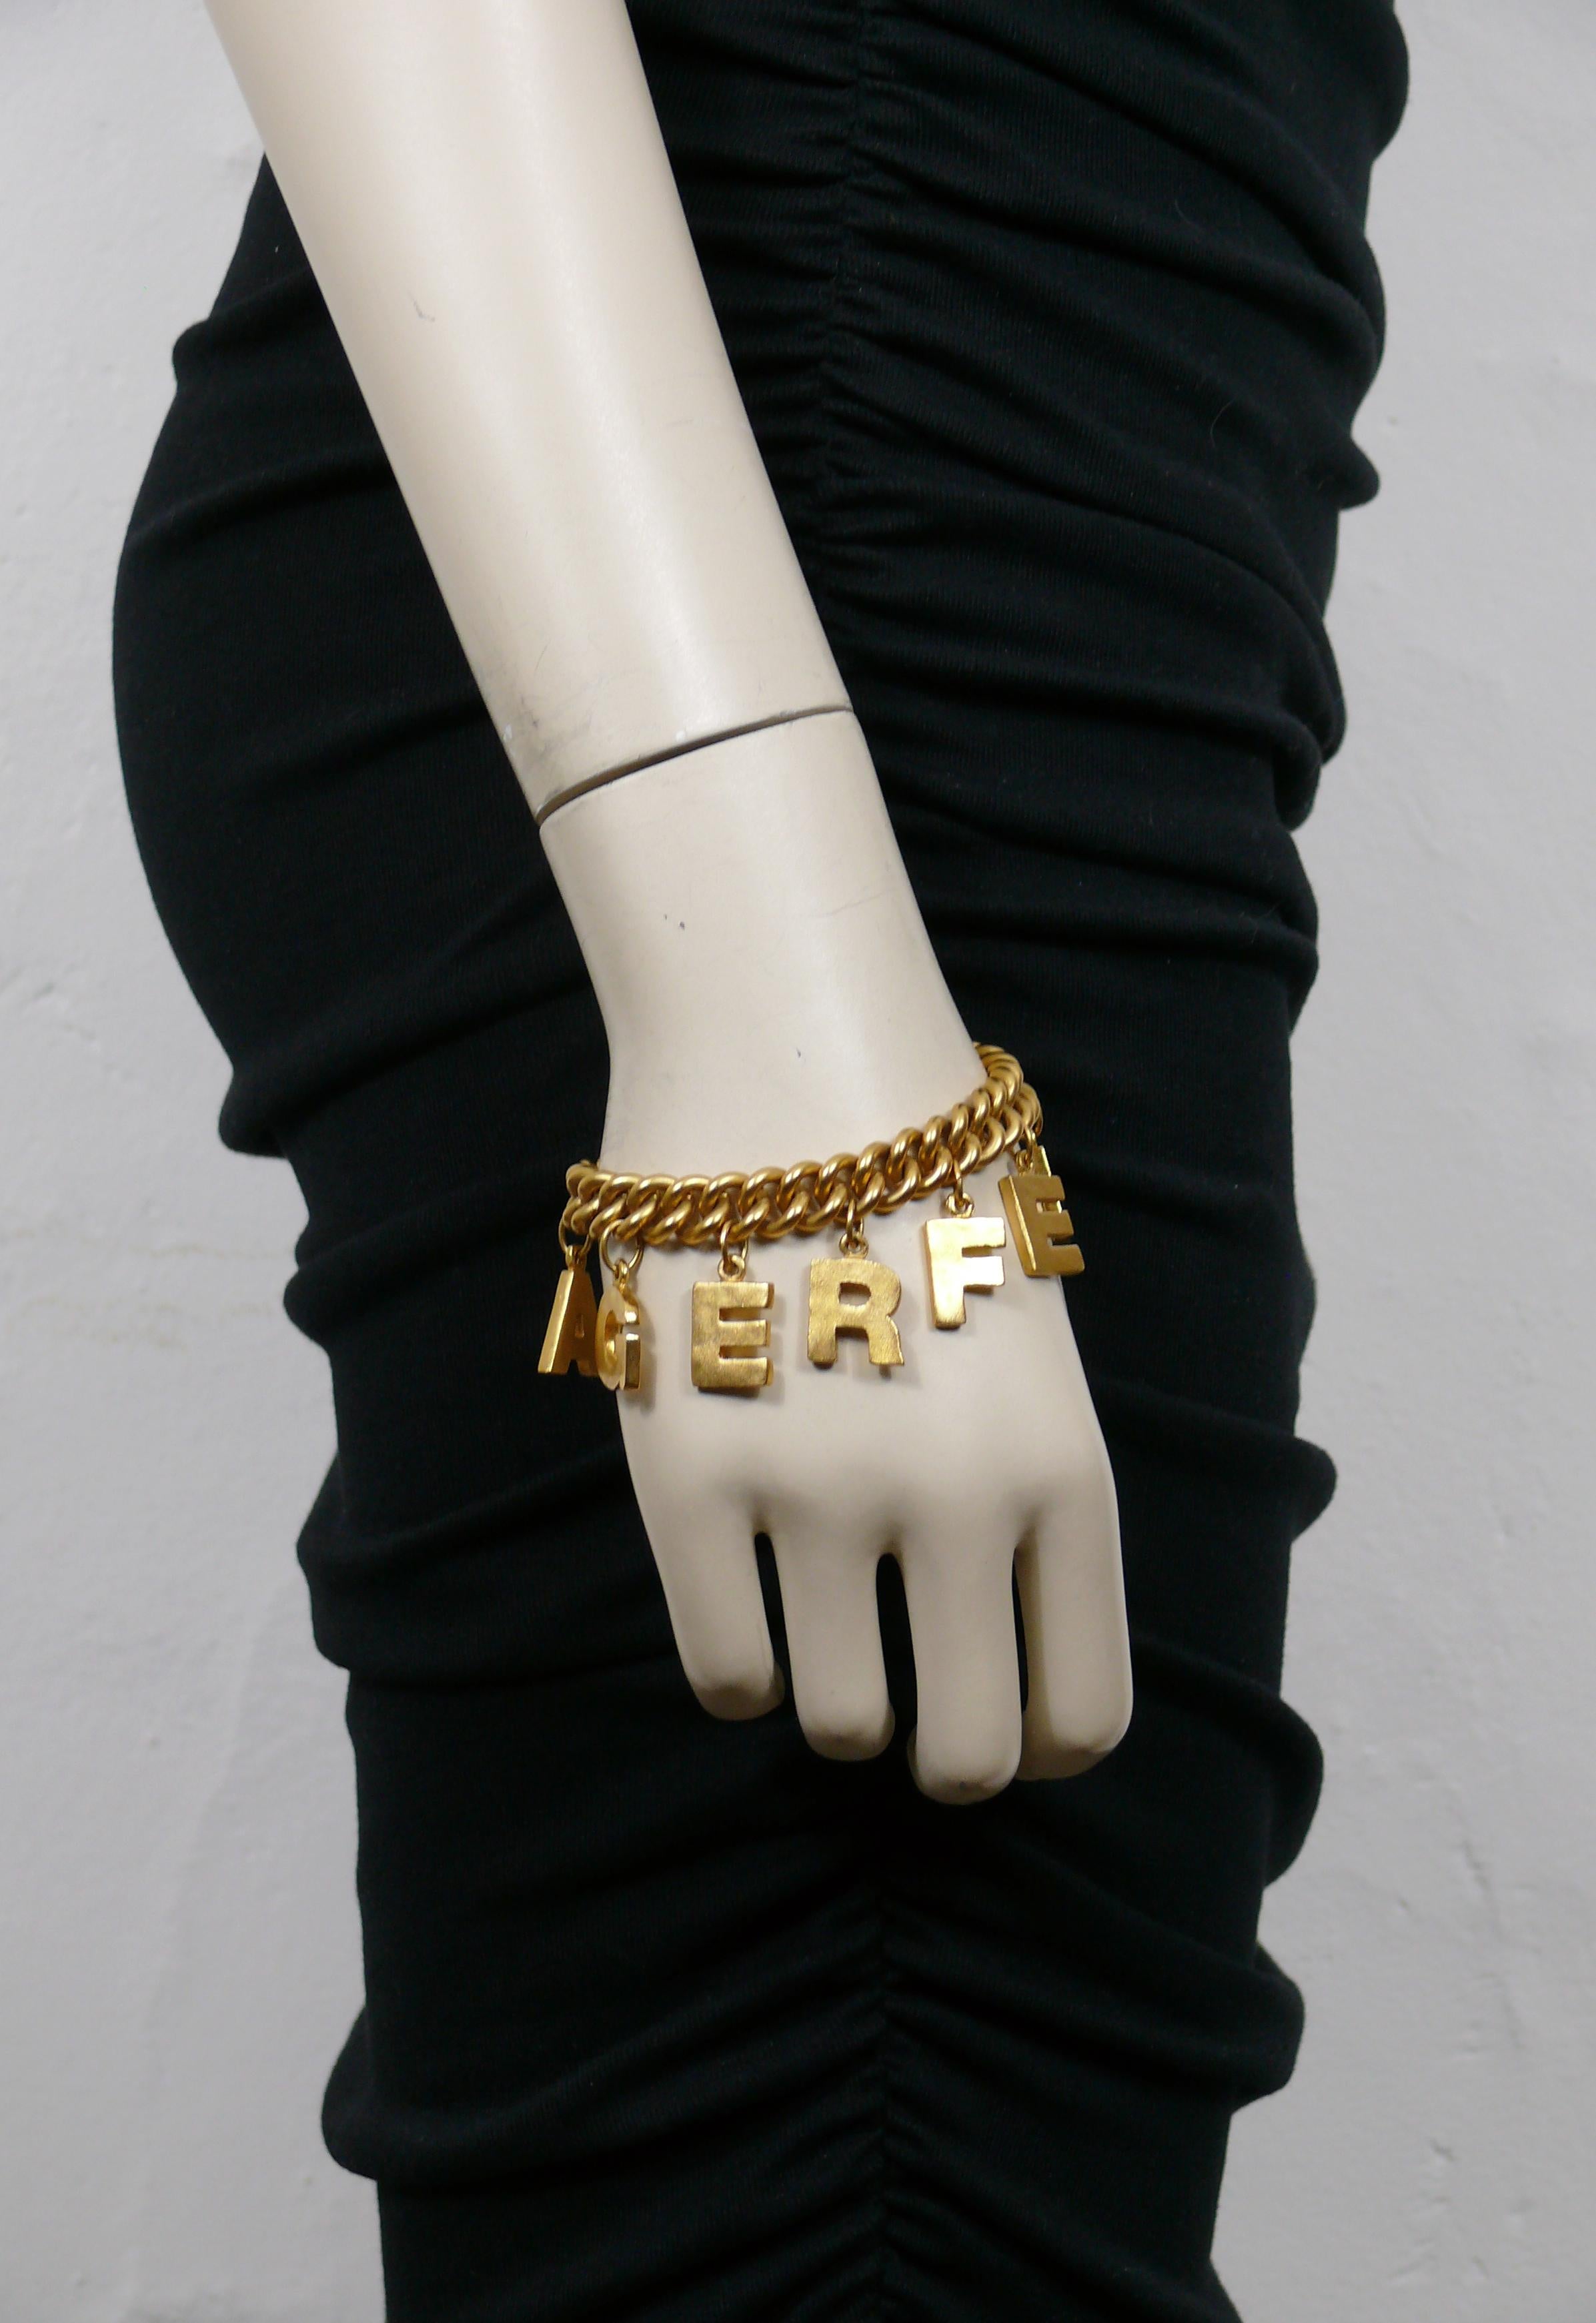 KARL LAGERFELD vintage gold tone chain bracelet featuring L A G E R F E L D lettering charms.

Adjustable lobster clasp closure.

Embossed KL.

Indicative measurements : adjustable length from approx. 18.5 cm (7.28 inches) to approx. 20.5 cm (8.07